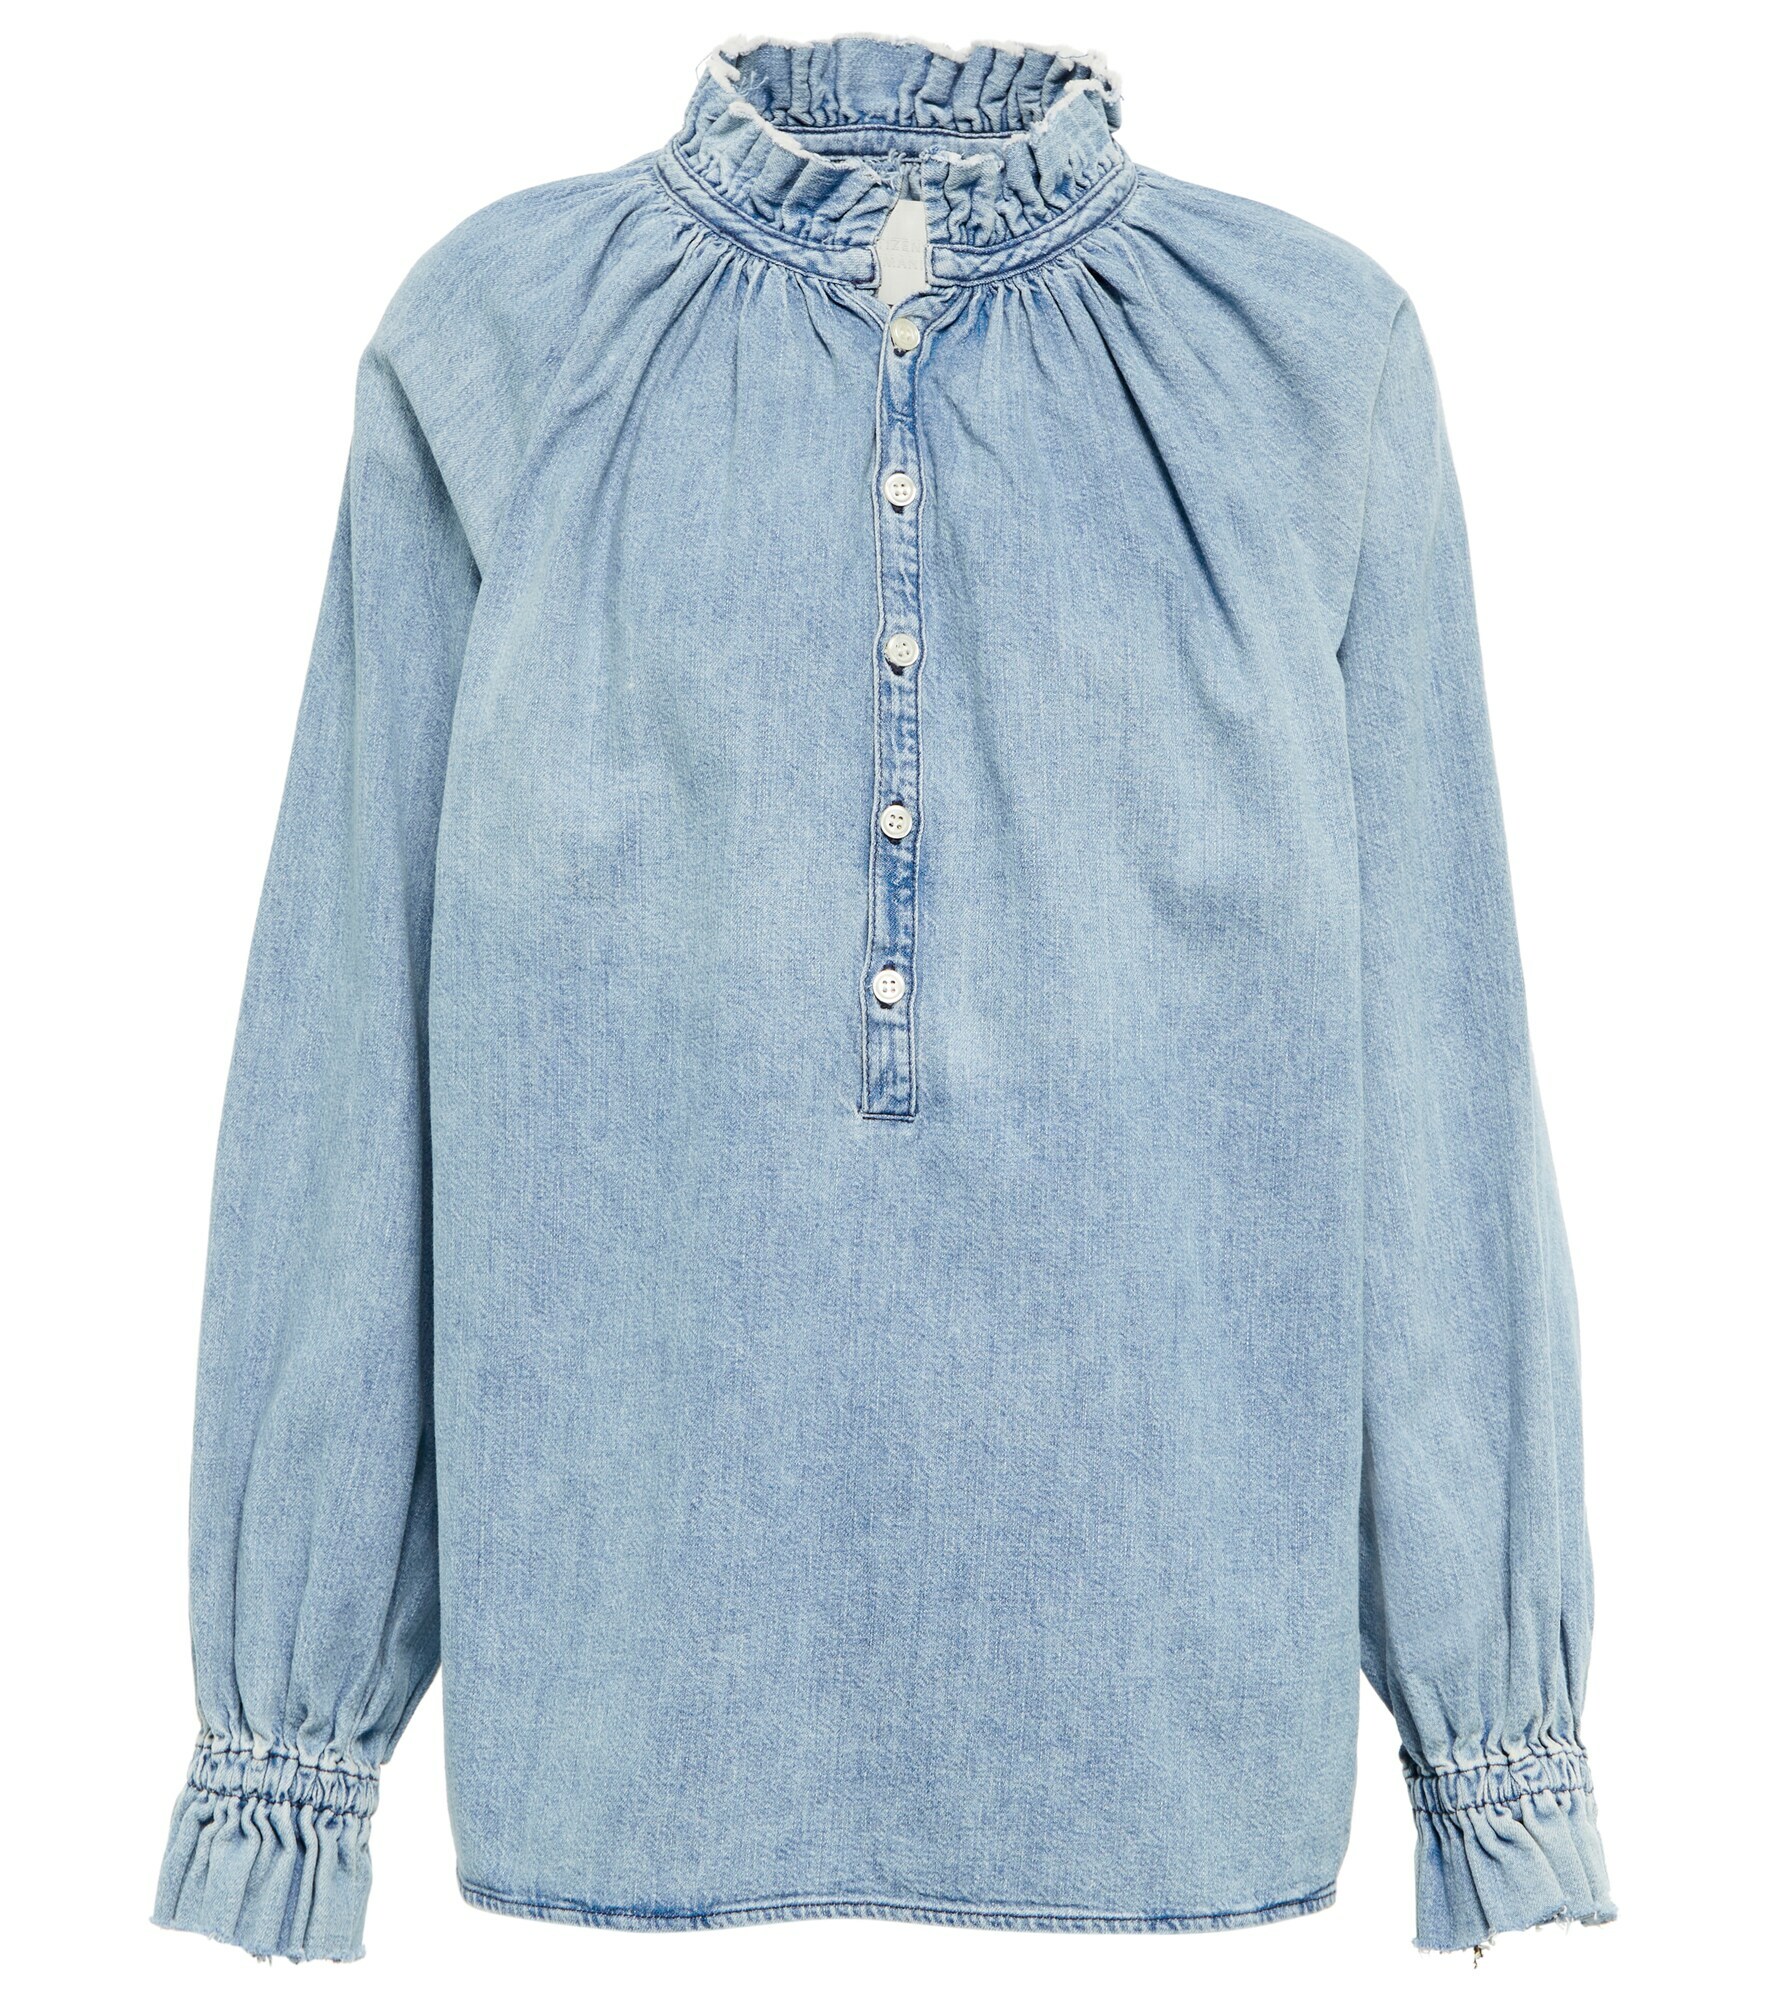 Citizens of Humanity - Iris denim blouse Citizens of Humanity